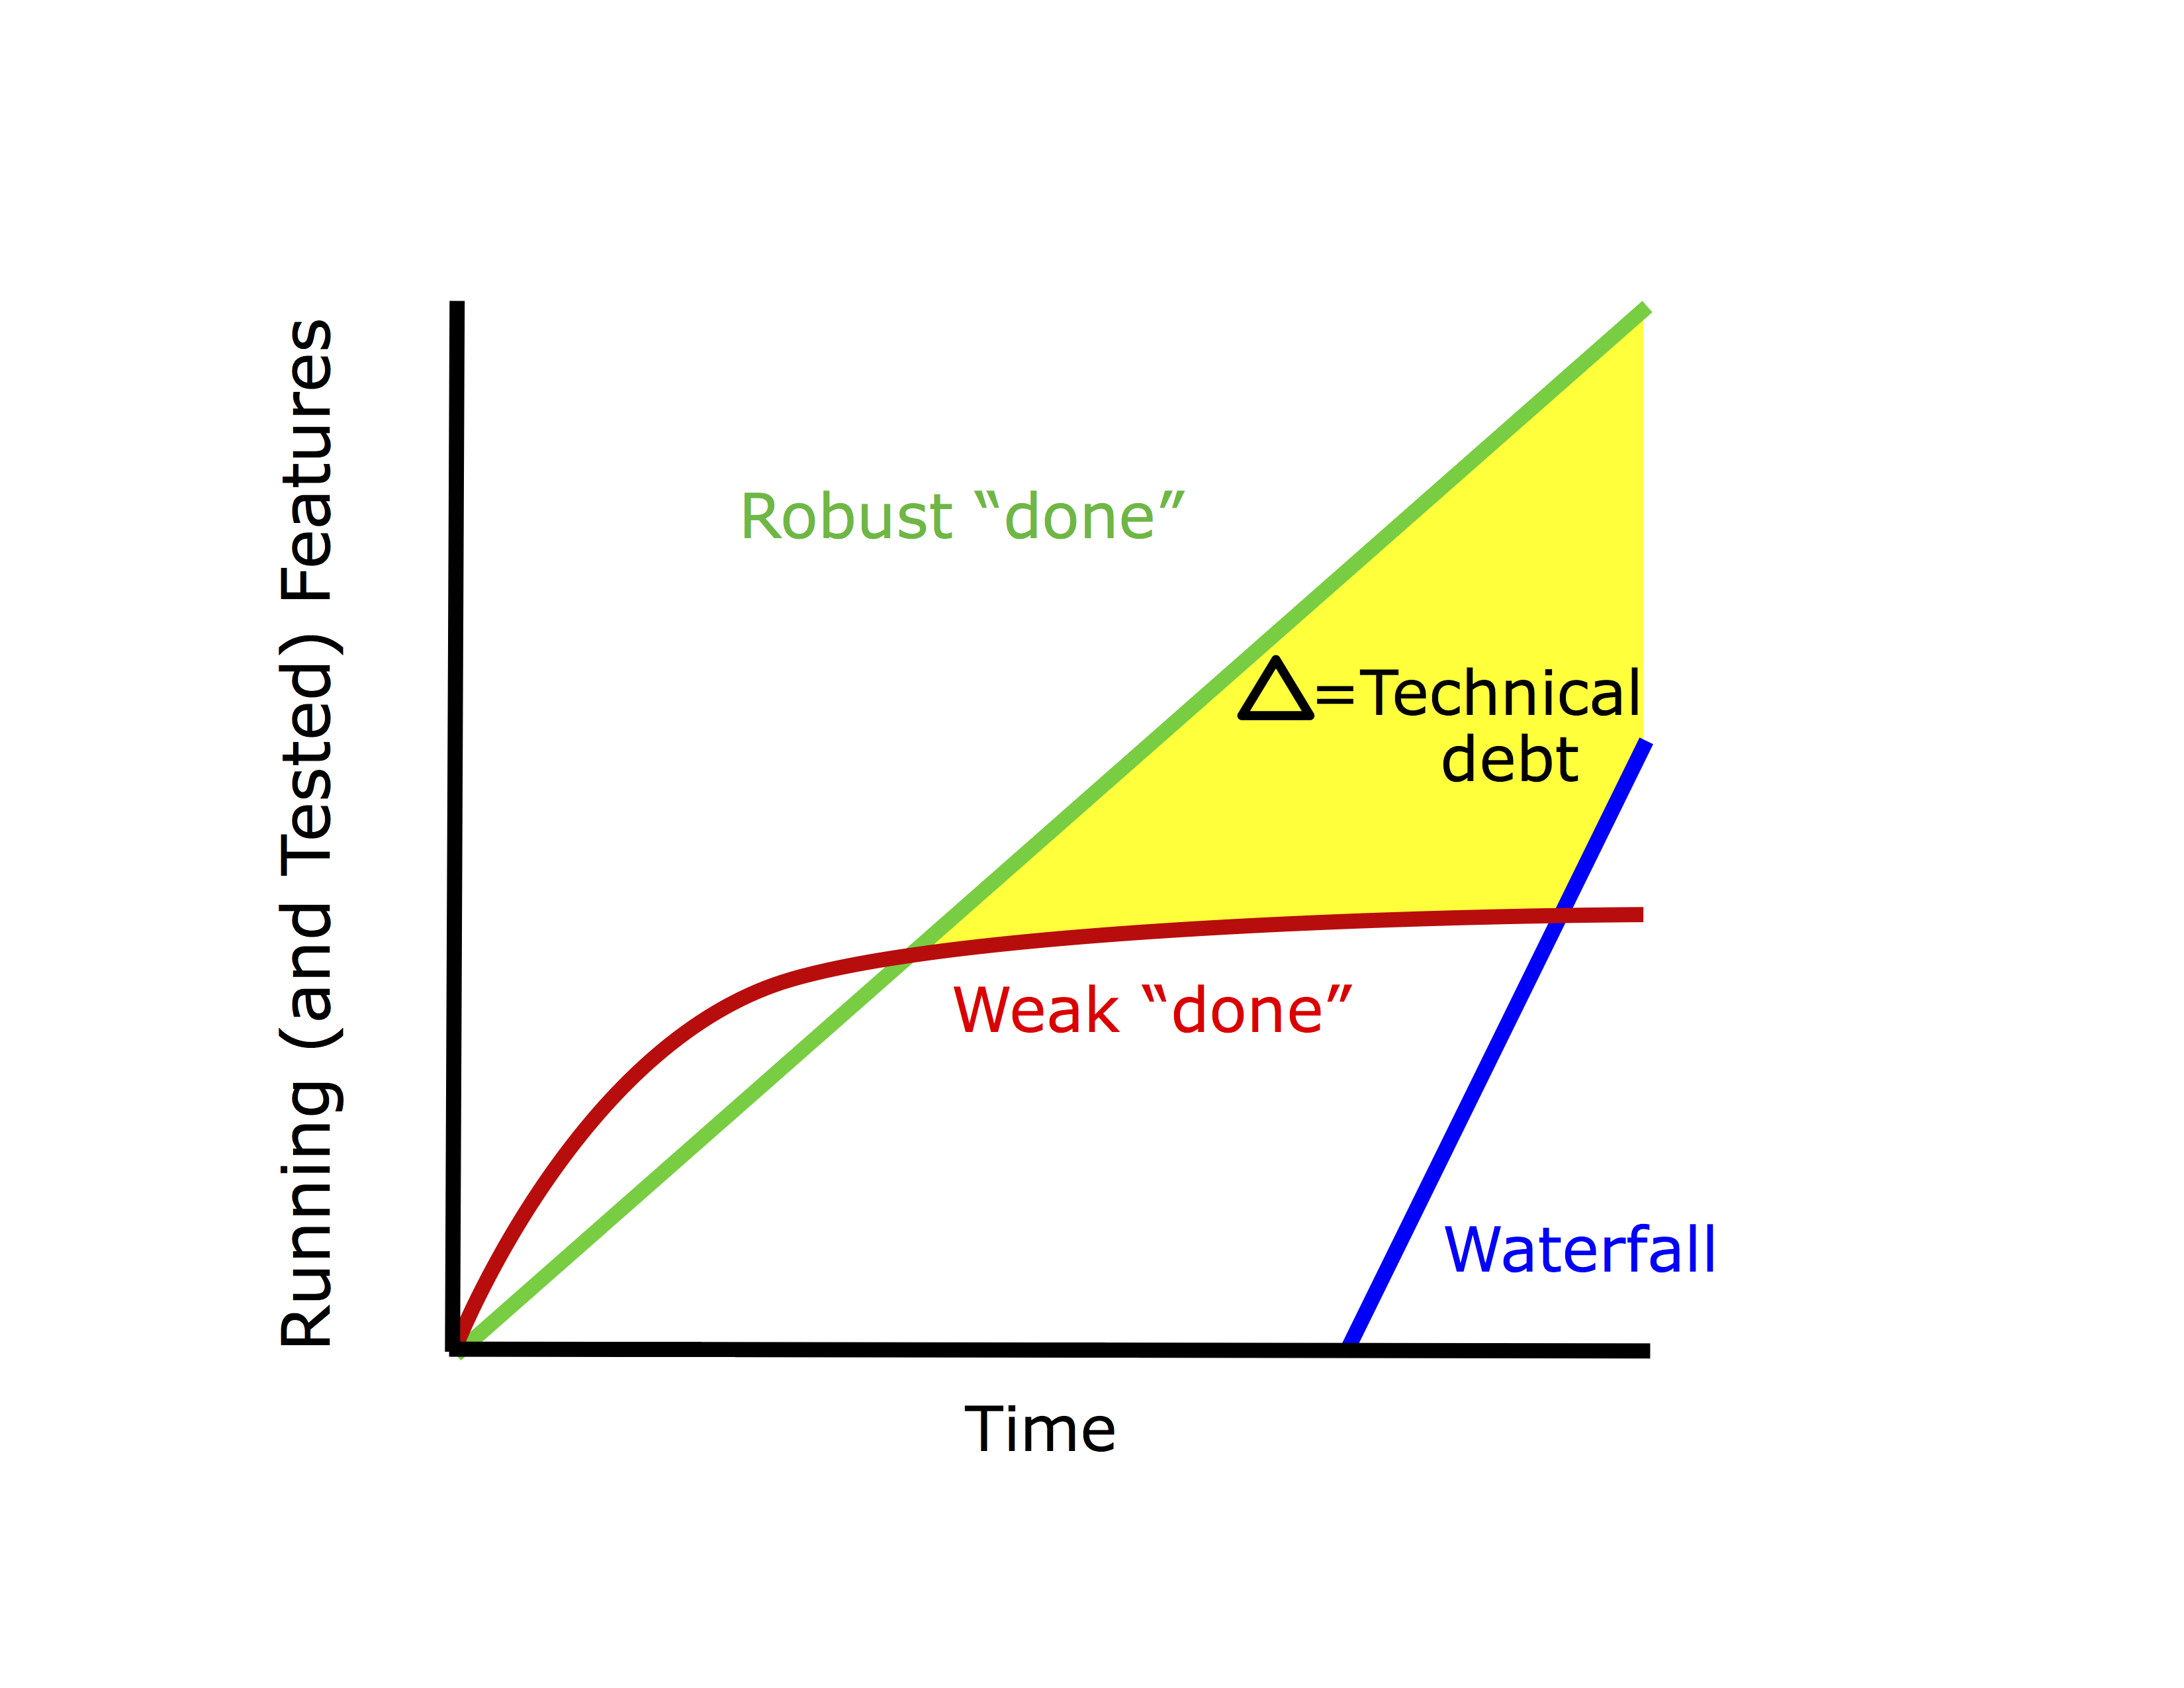 Technical Debt Is The High Cost Of Future Change.